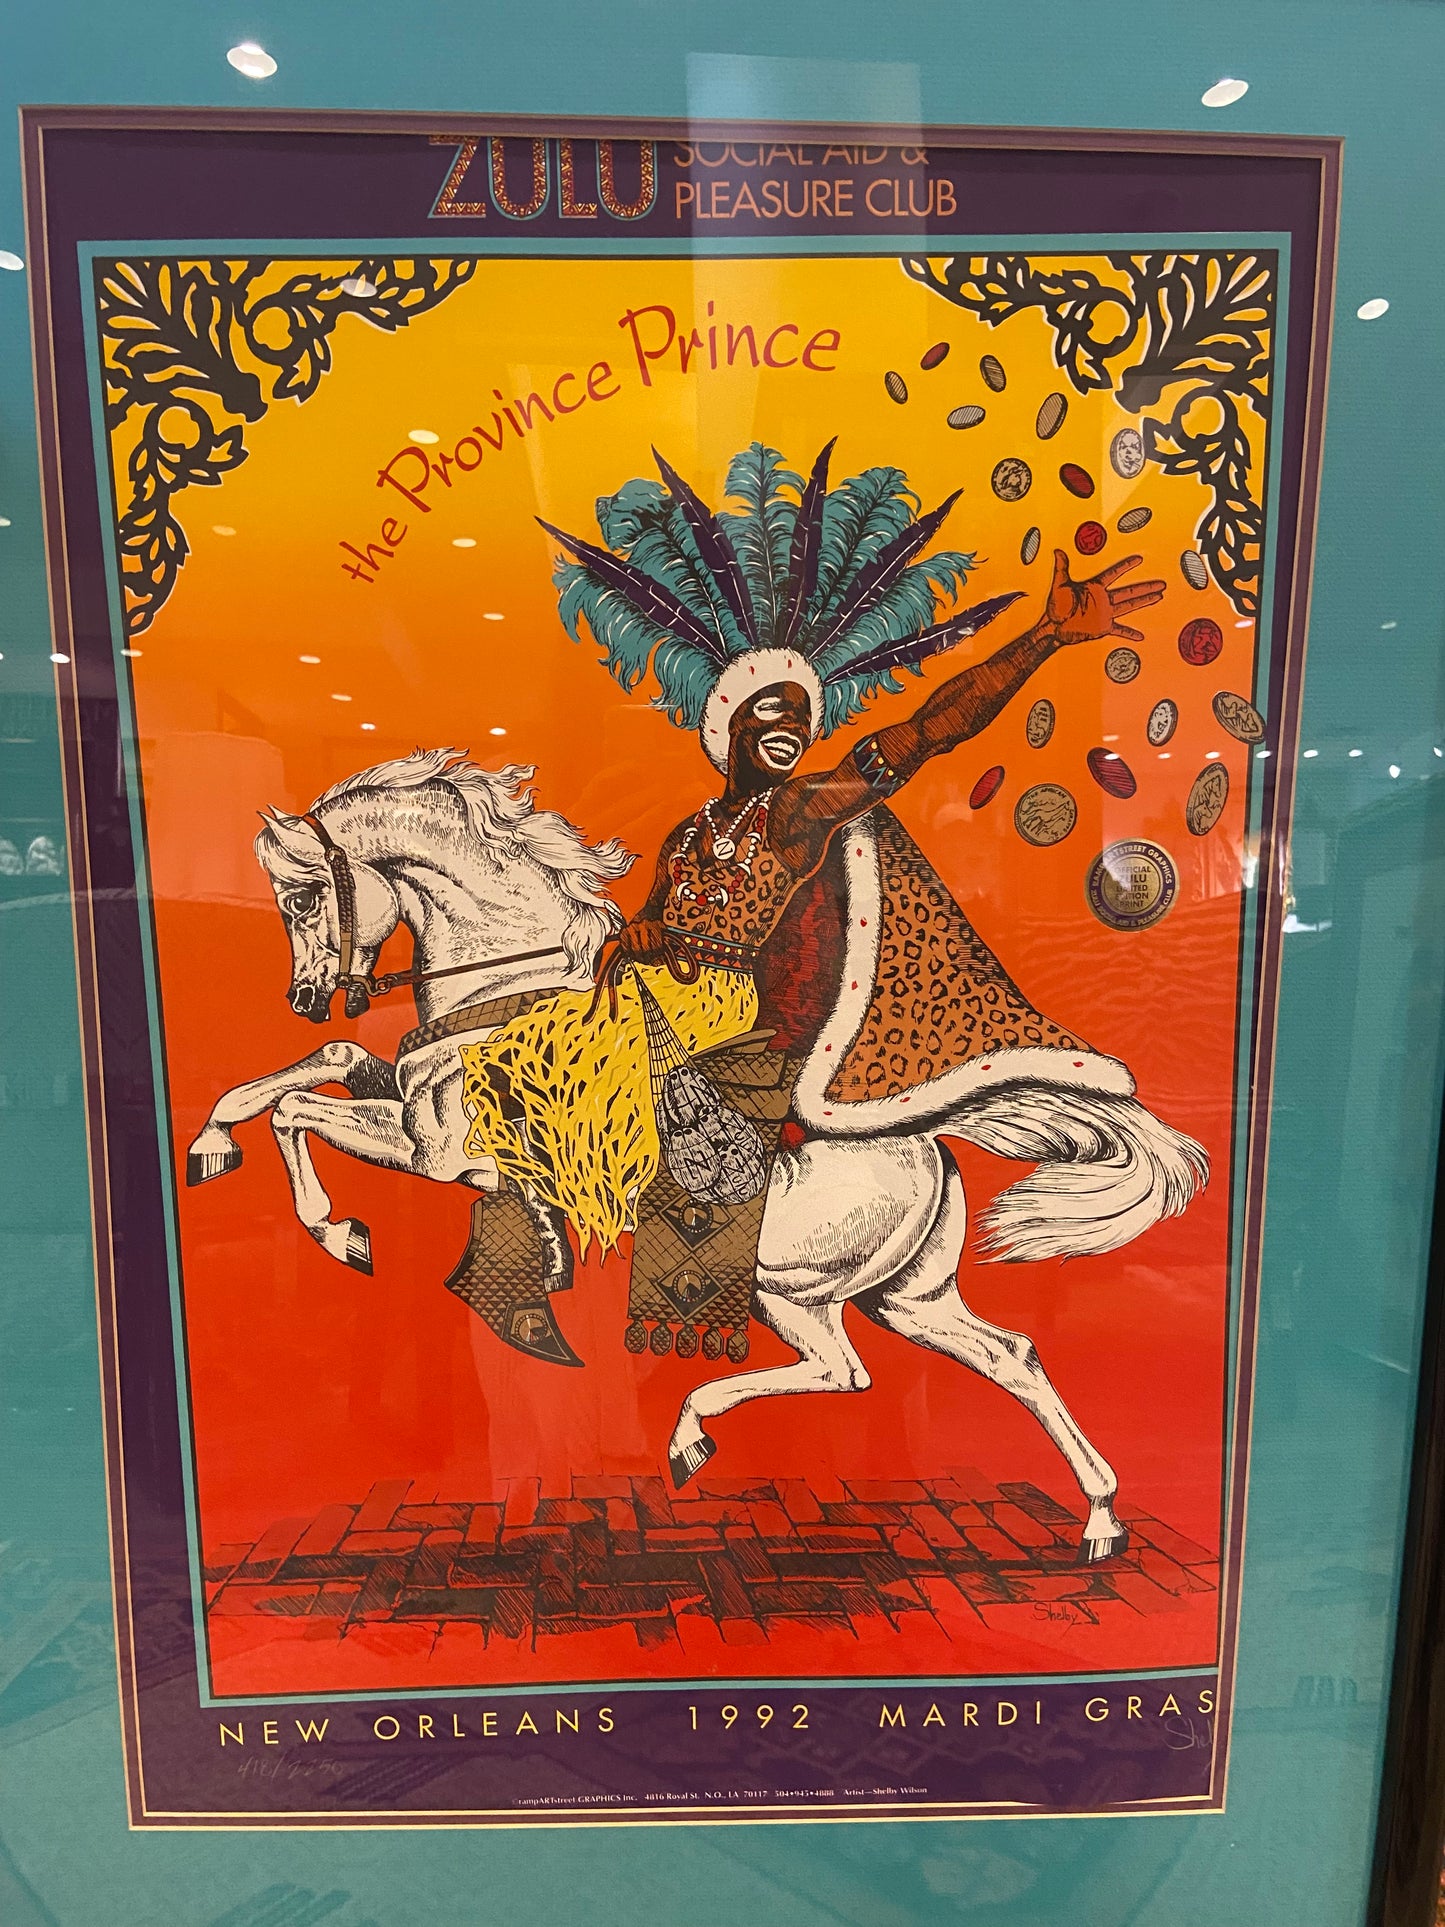 Zulu Social and Pleasure Club Limited Edition Poster "Province Prince" (25031)